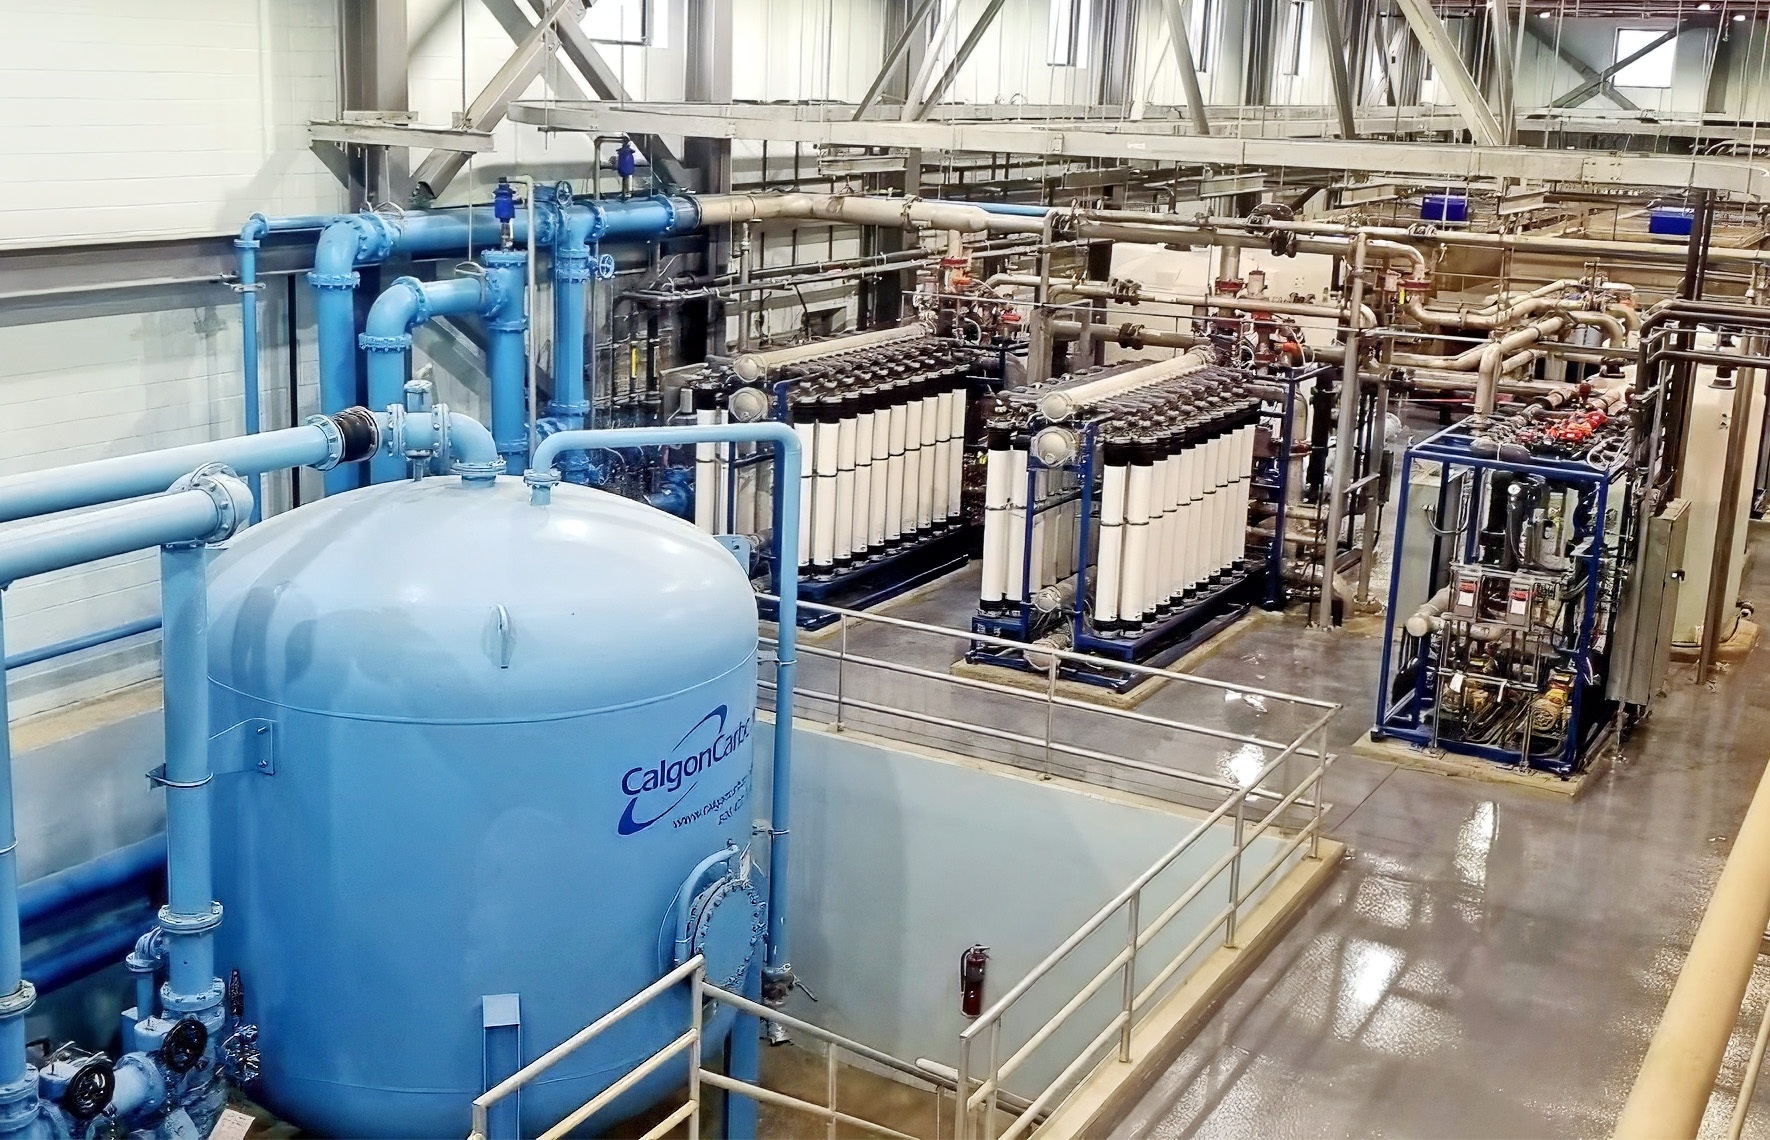 On the Perry Point Potable Water System Improvements project, the Ulliman Schutte team completed the construction of a new, state-of-the-art 1 MGD membrane water treatment plant.